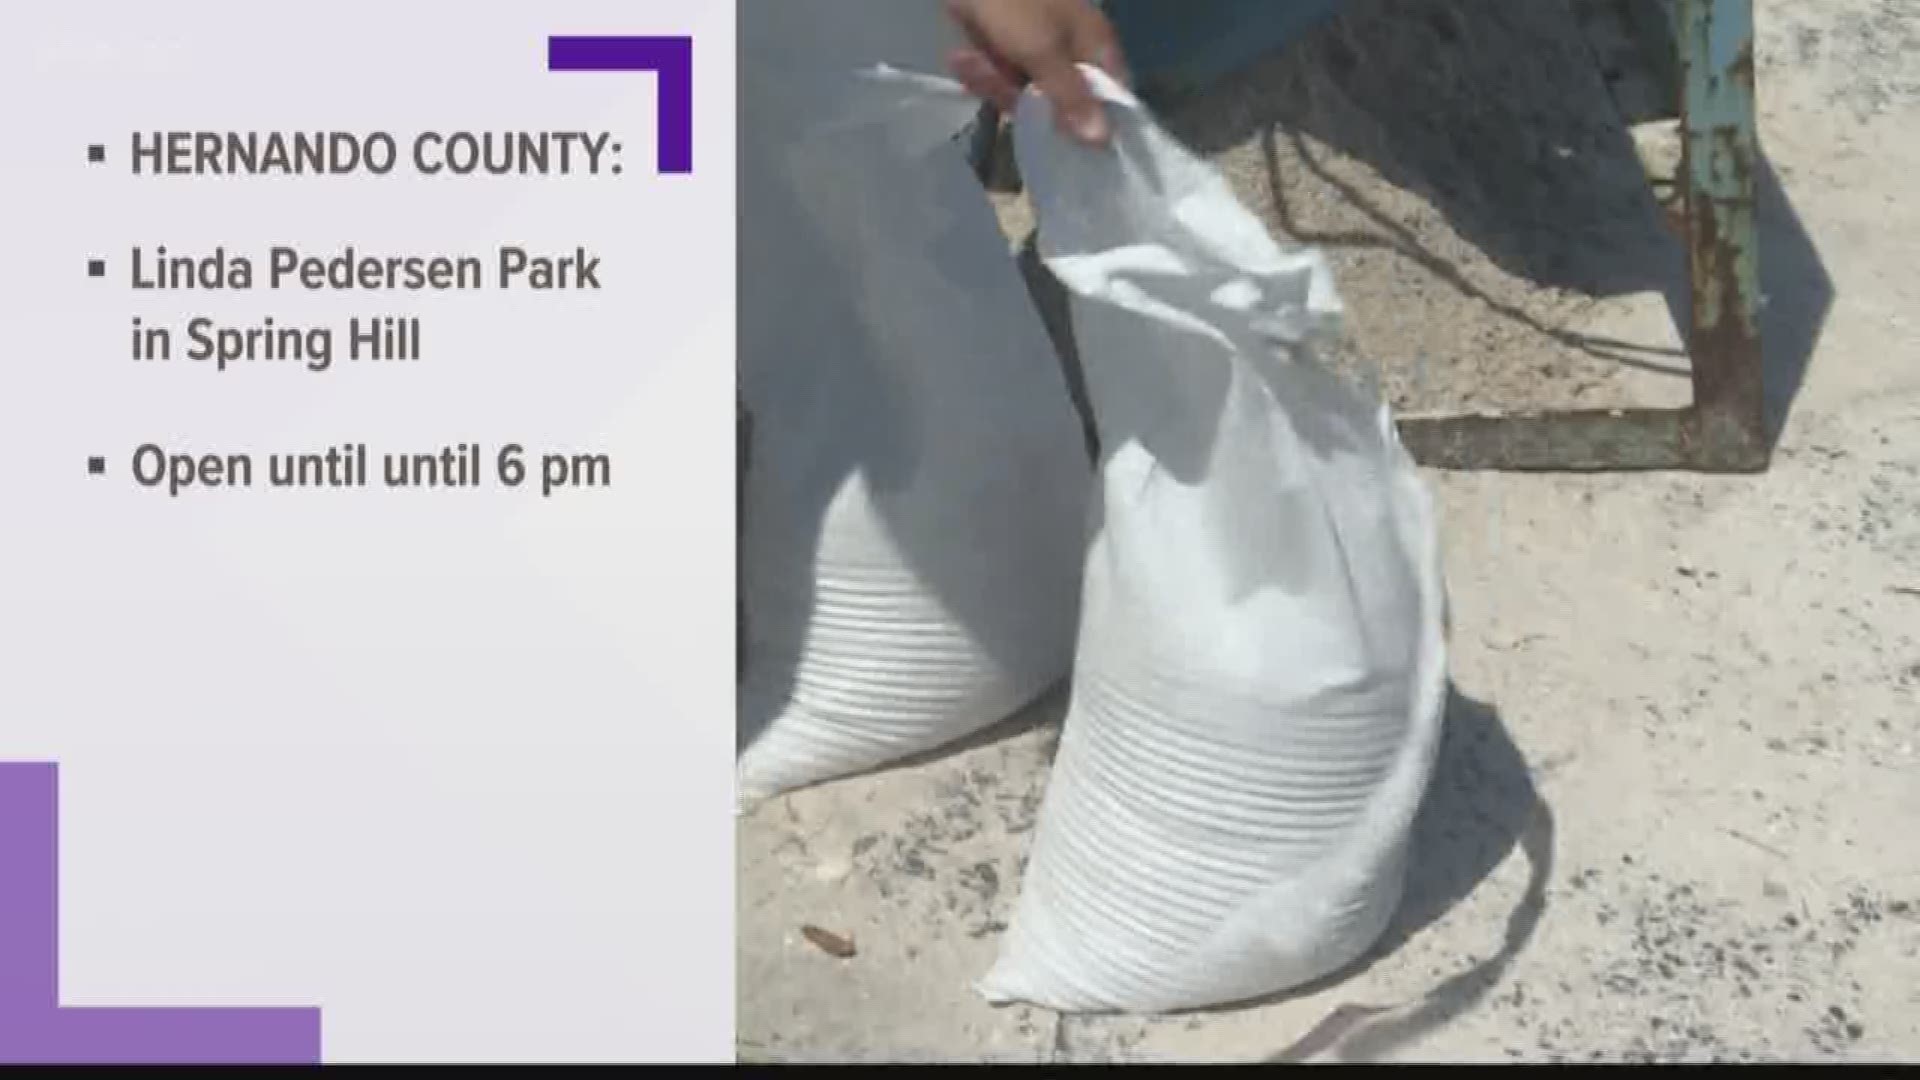 With Tropical Storm Nestor expected to cause storm surge, some counties and cities along Florida's Gulf Coast opened sandbag sites.